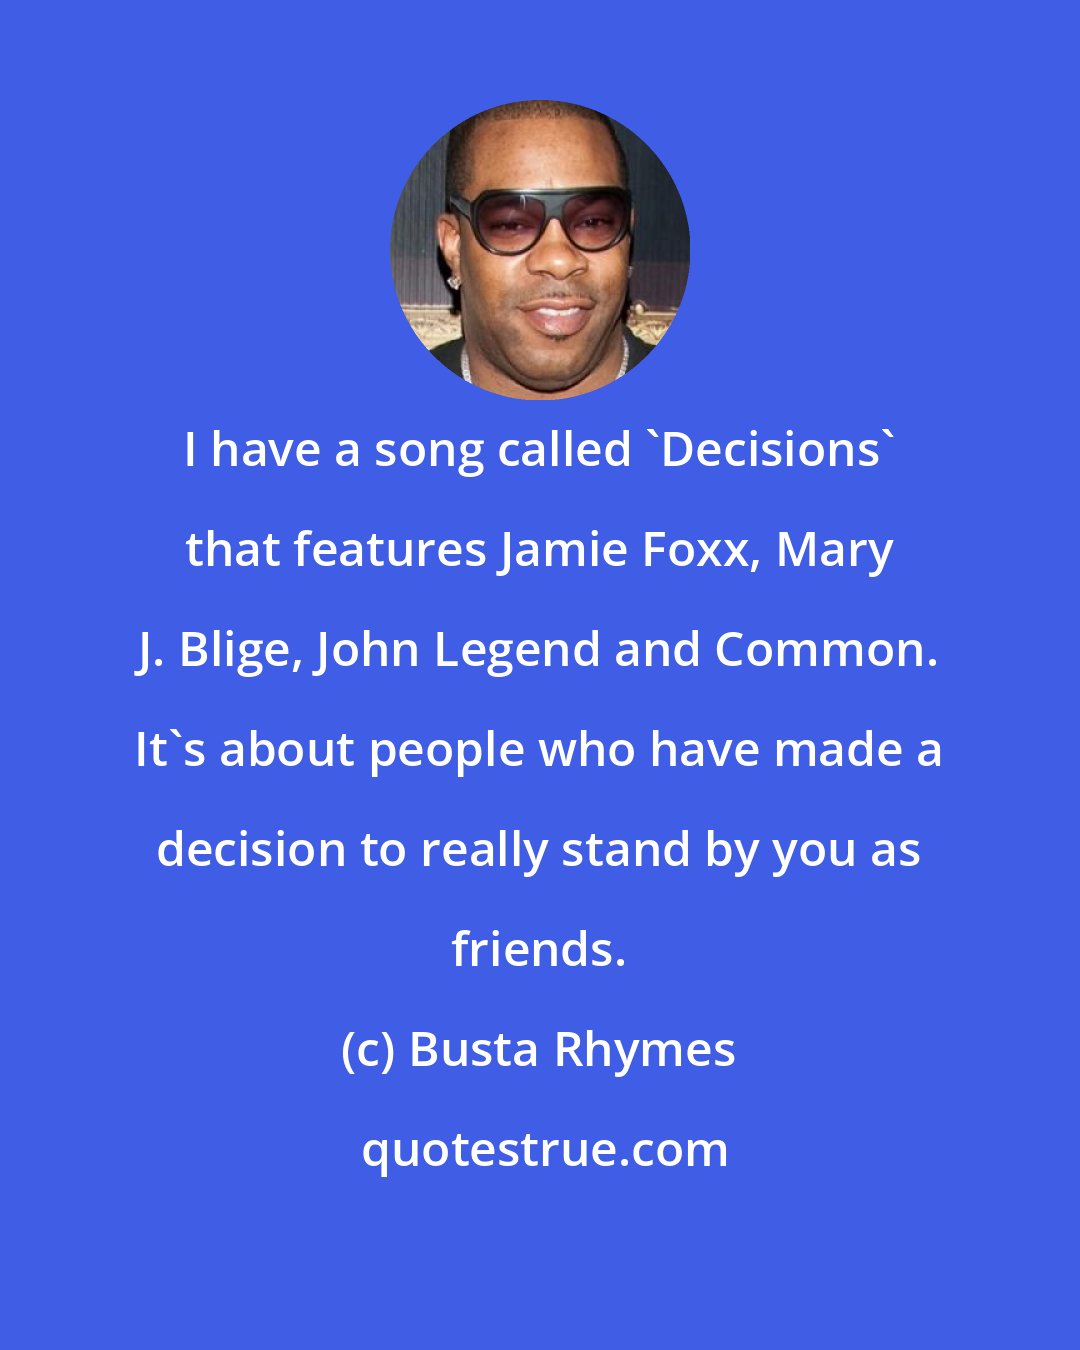 Busta Rhymes: I have a song called 'Decisions' that features Jamie Foxx, Mary J. Blige, John Legend and Common. It's about people who have made a decision to really stand by you as friends.